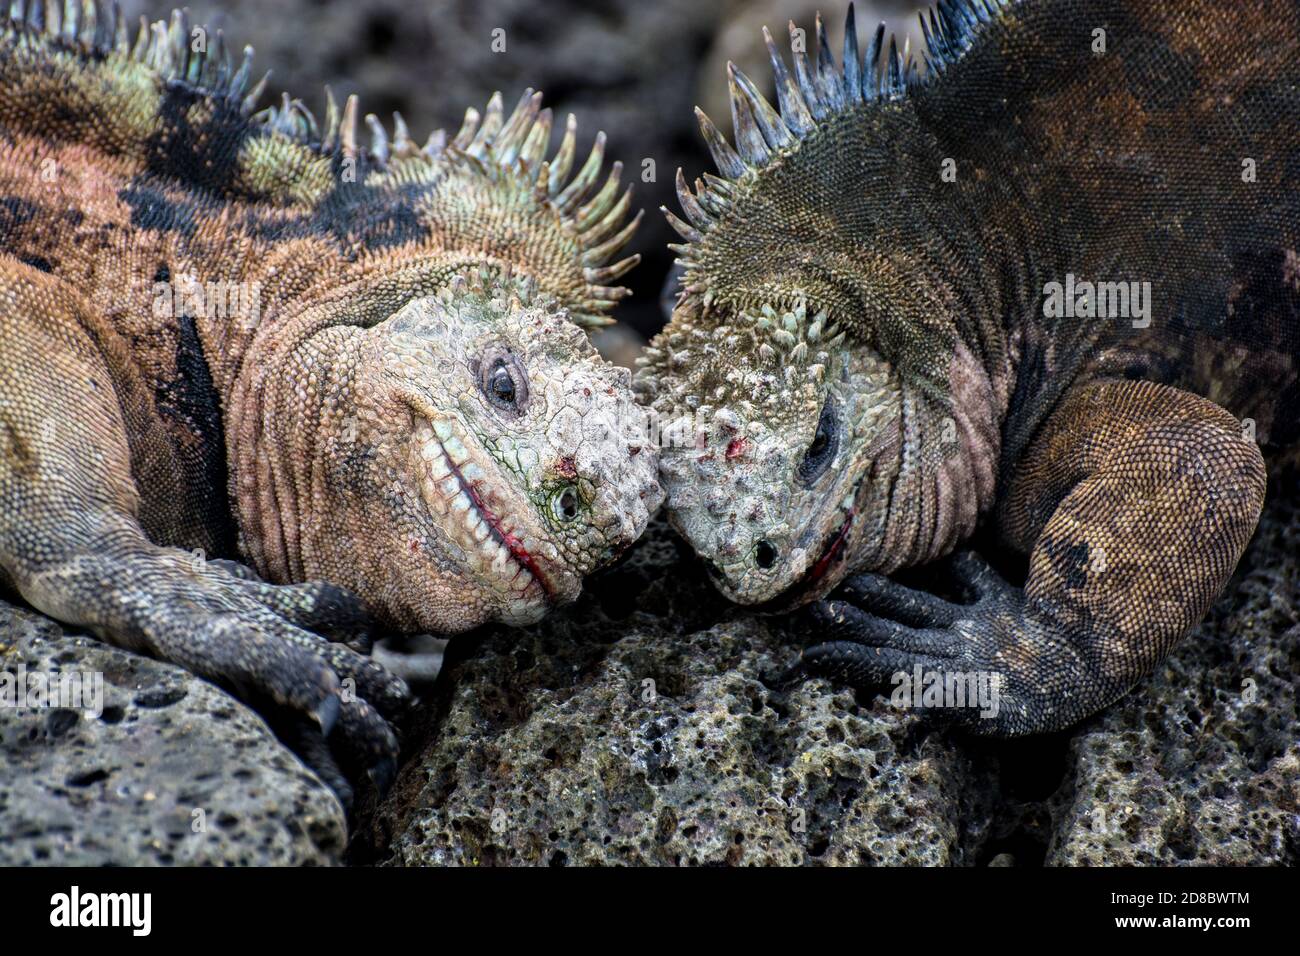 Two male marine iguanas (Amblyrhynchus cristatus) fighting over territory by butting their heads together. Stock Photo